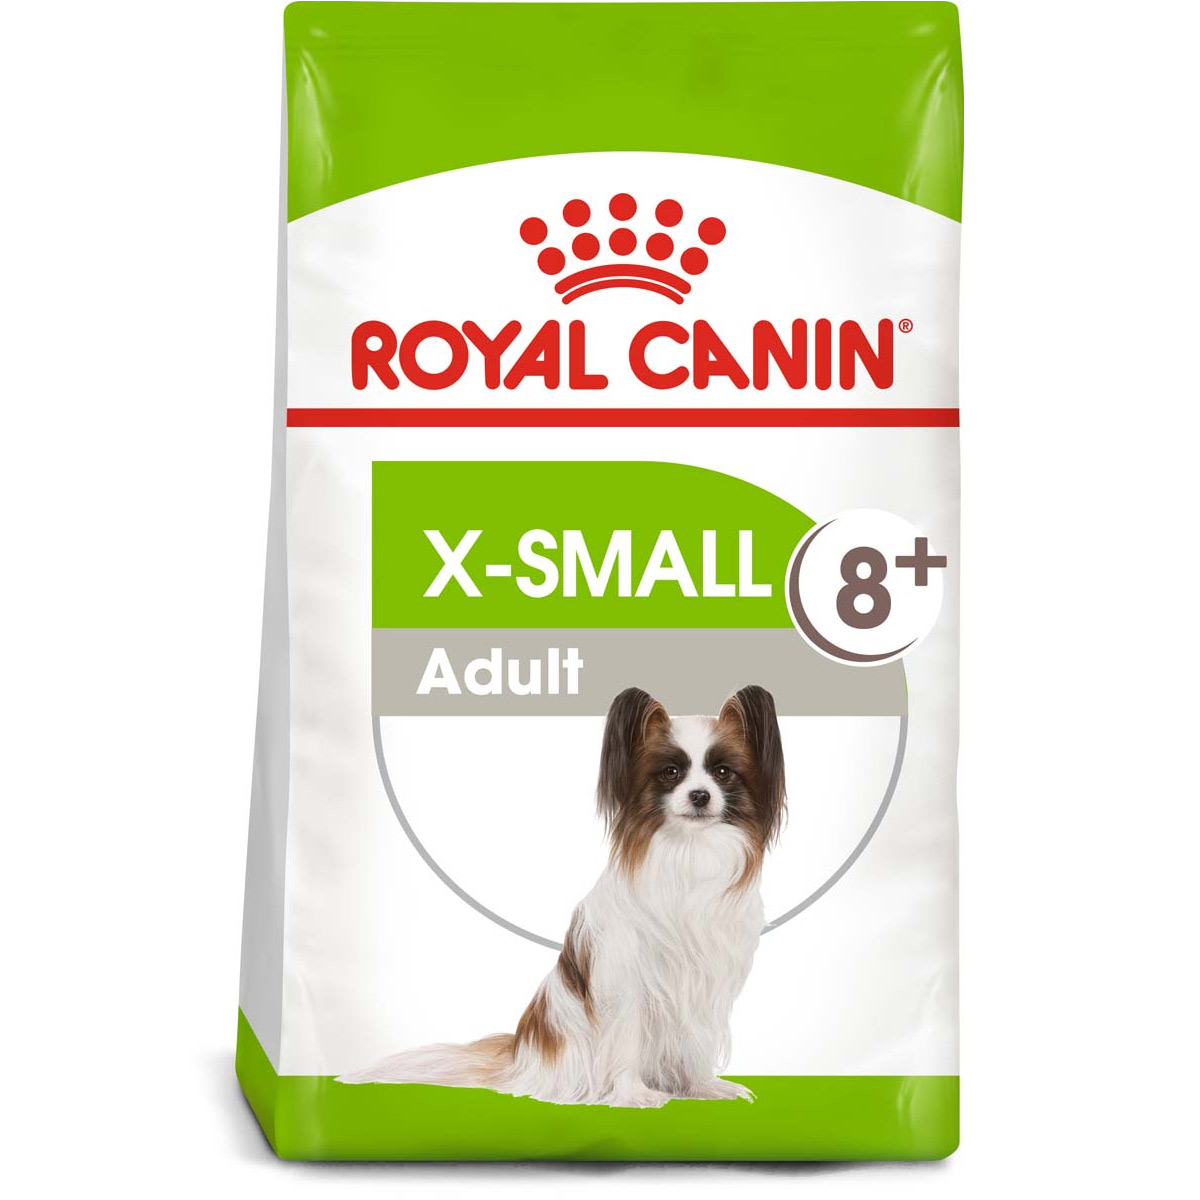 ROYAL CANIN X-SMALL Adult 8+ 2 × 3 kg